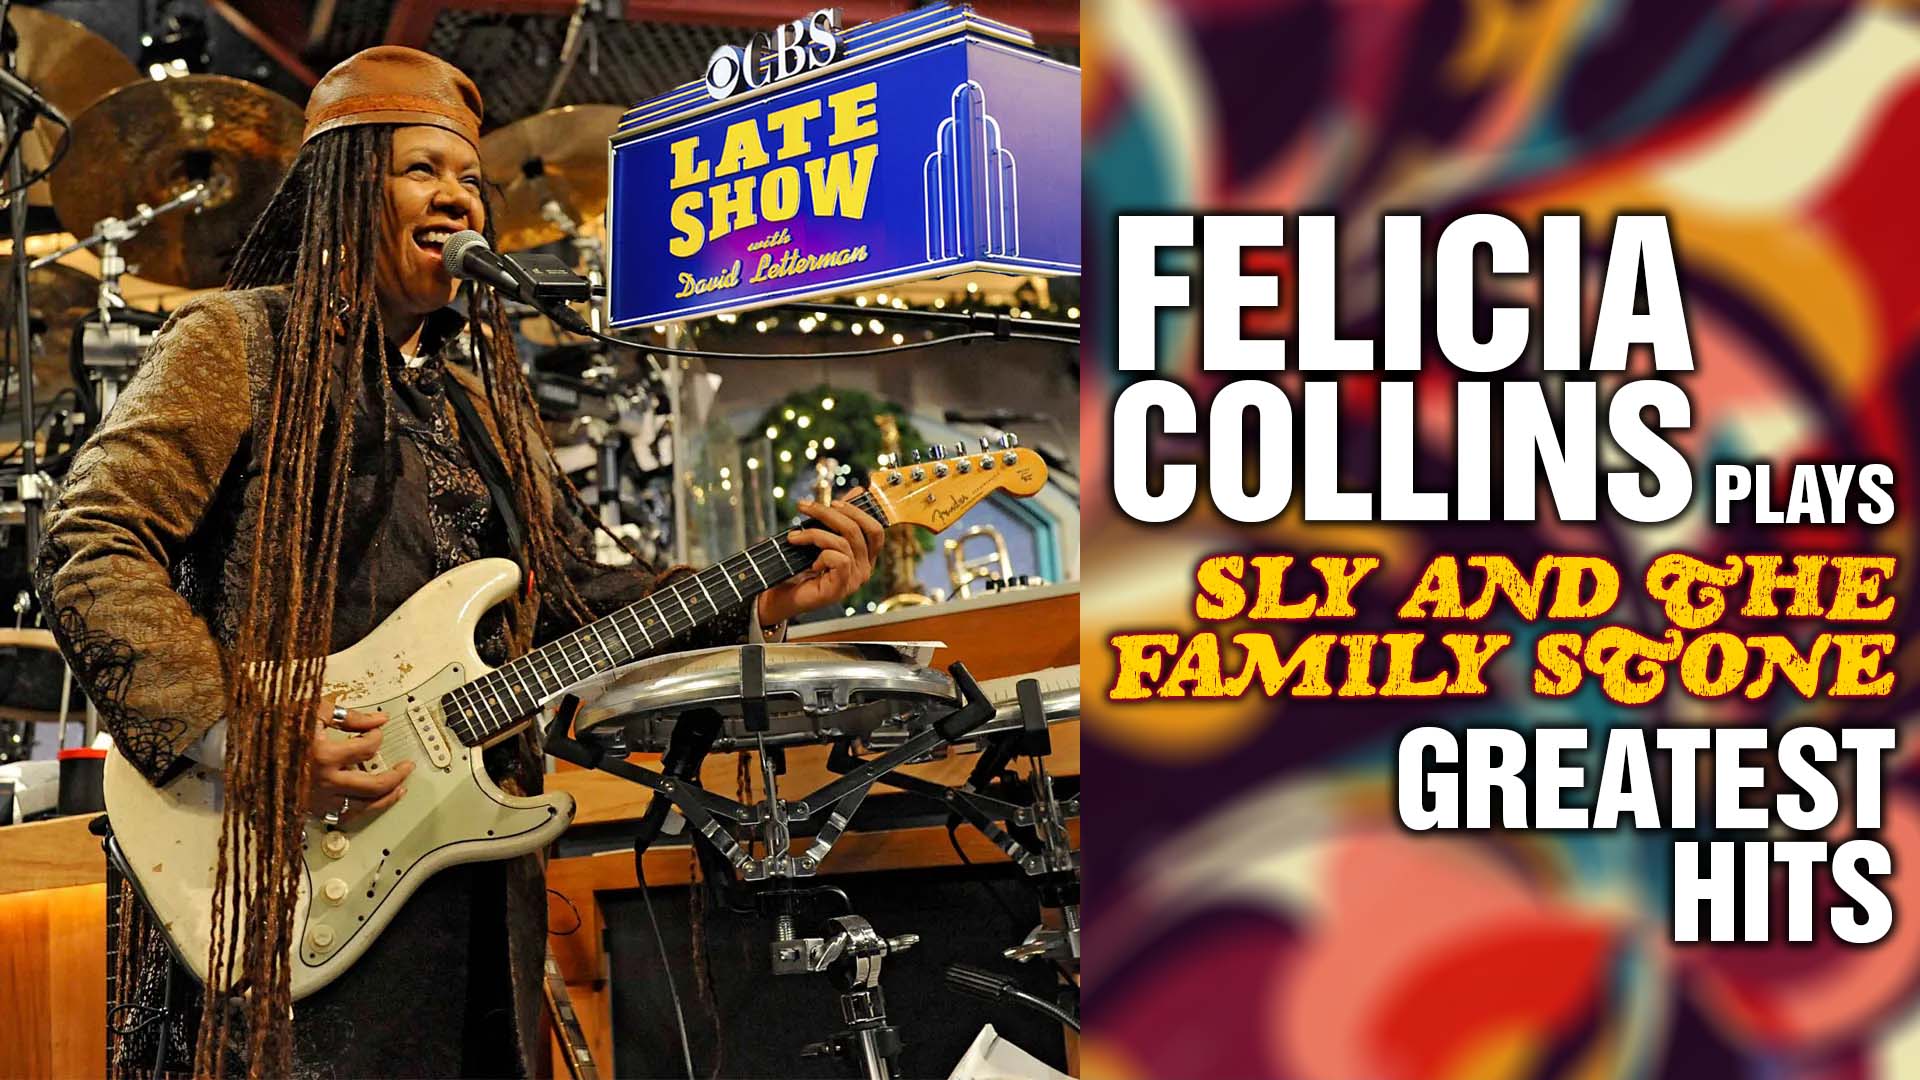 Felicia Collins Plays Sly and the Family Stone Greatest Hits